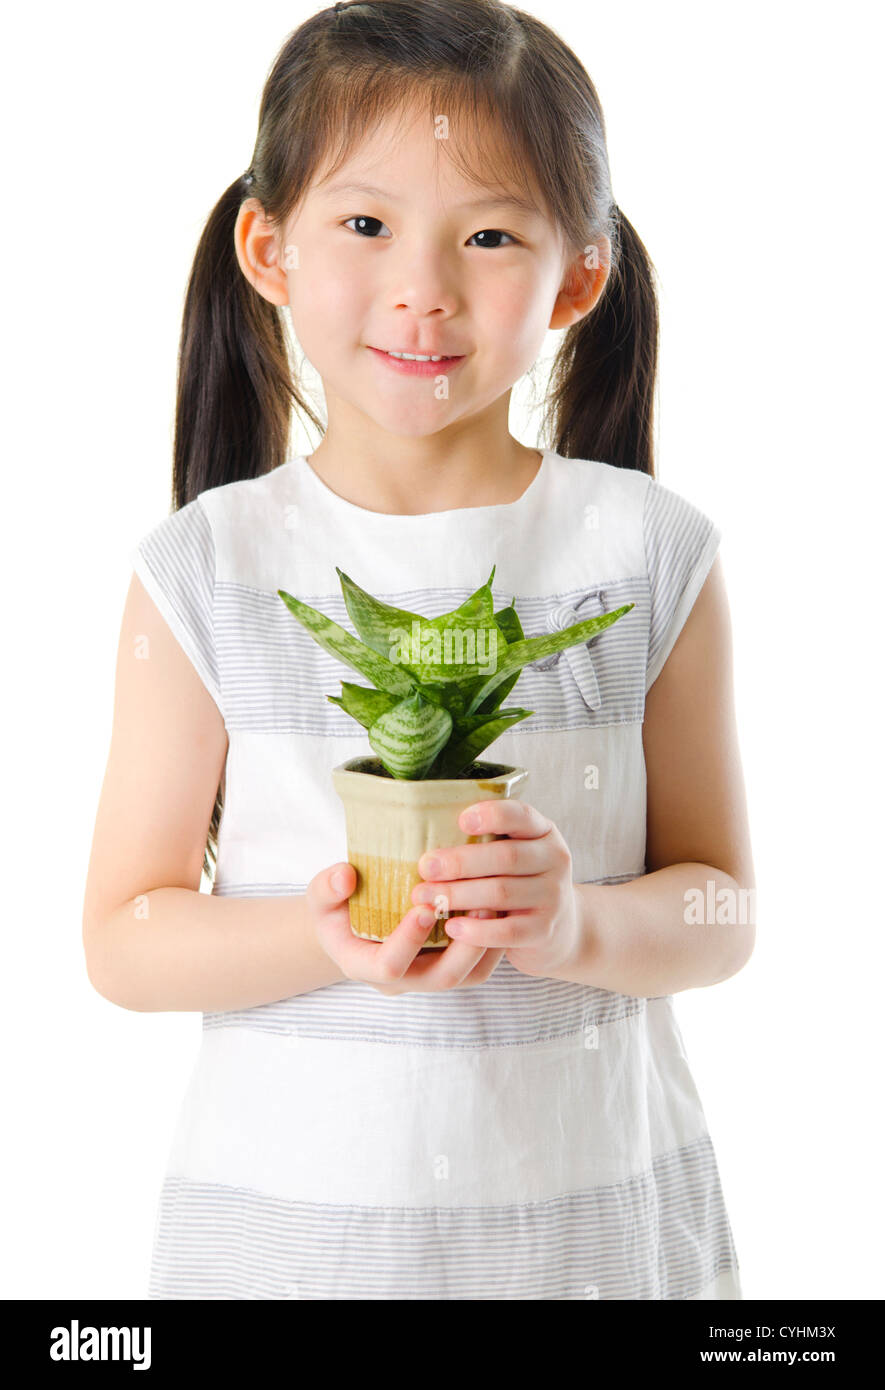 Concept of little girl holding a plant on white background Stock Photo